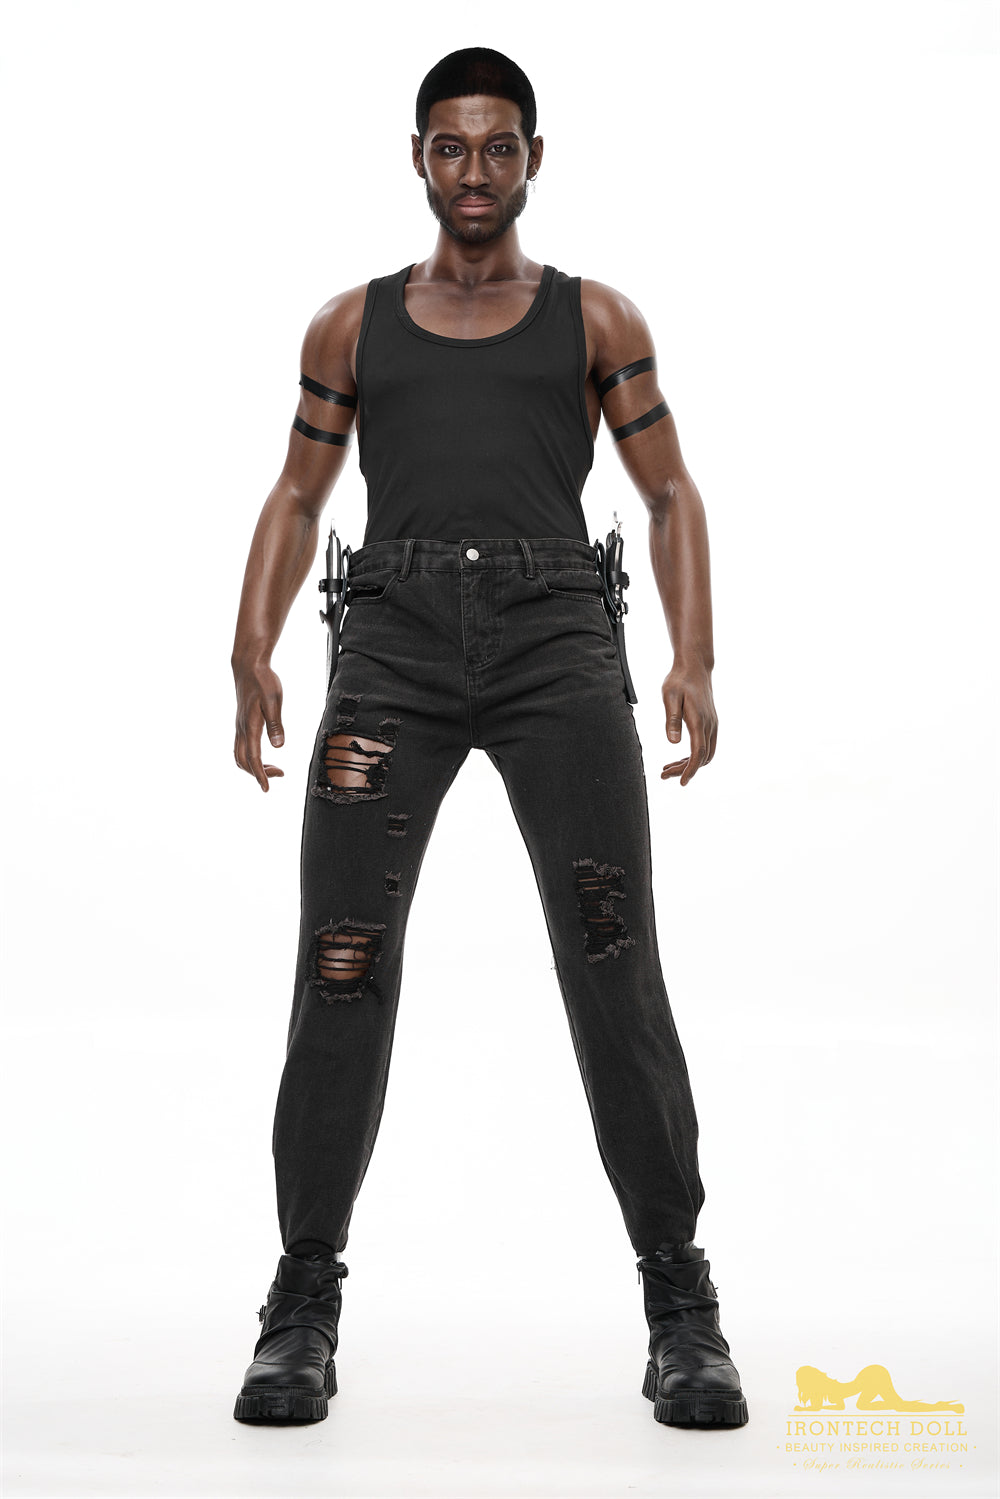 Irontechdoll Alfred 5ft77 / 176cm M7 Head Full Silicone Real-life Black Gay Male Love Doll